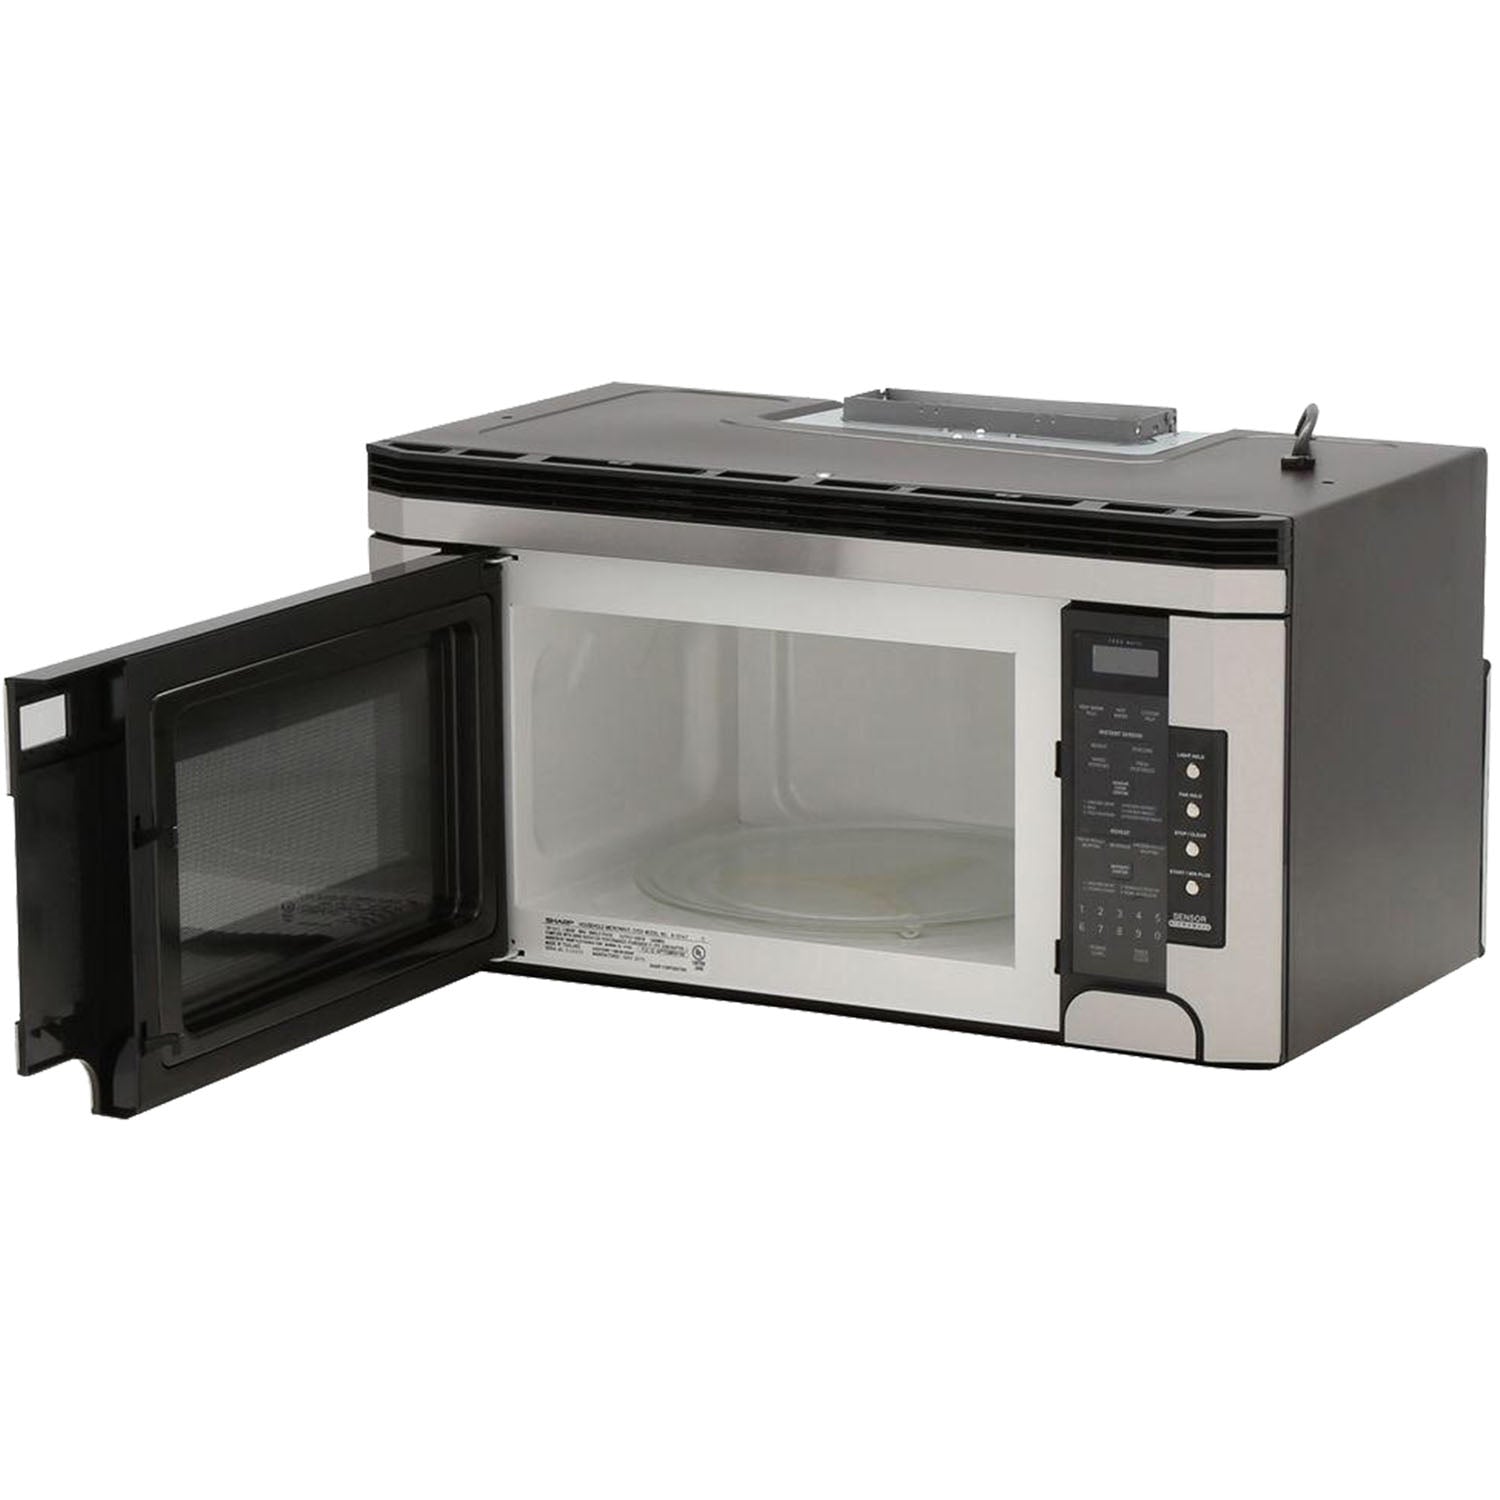 Sharp 1.5 cu. ft. 1000W 30 in. Over-the-Range Microwave Oven with Concealed Control Panel in Stainless Steel (R1514T)